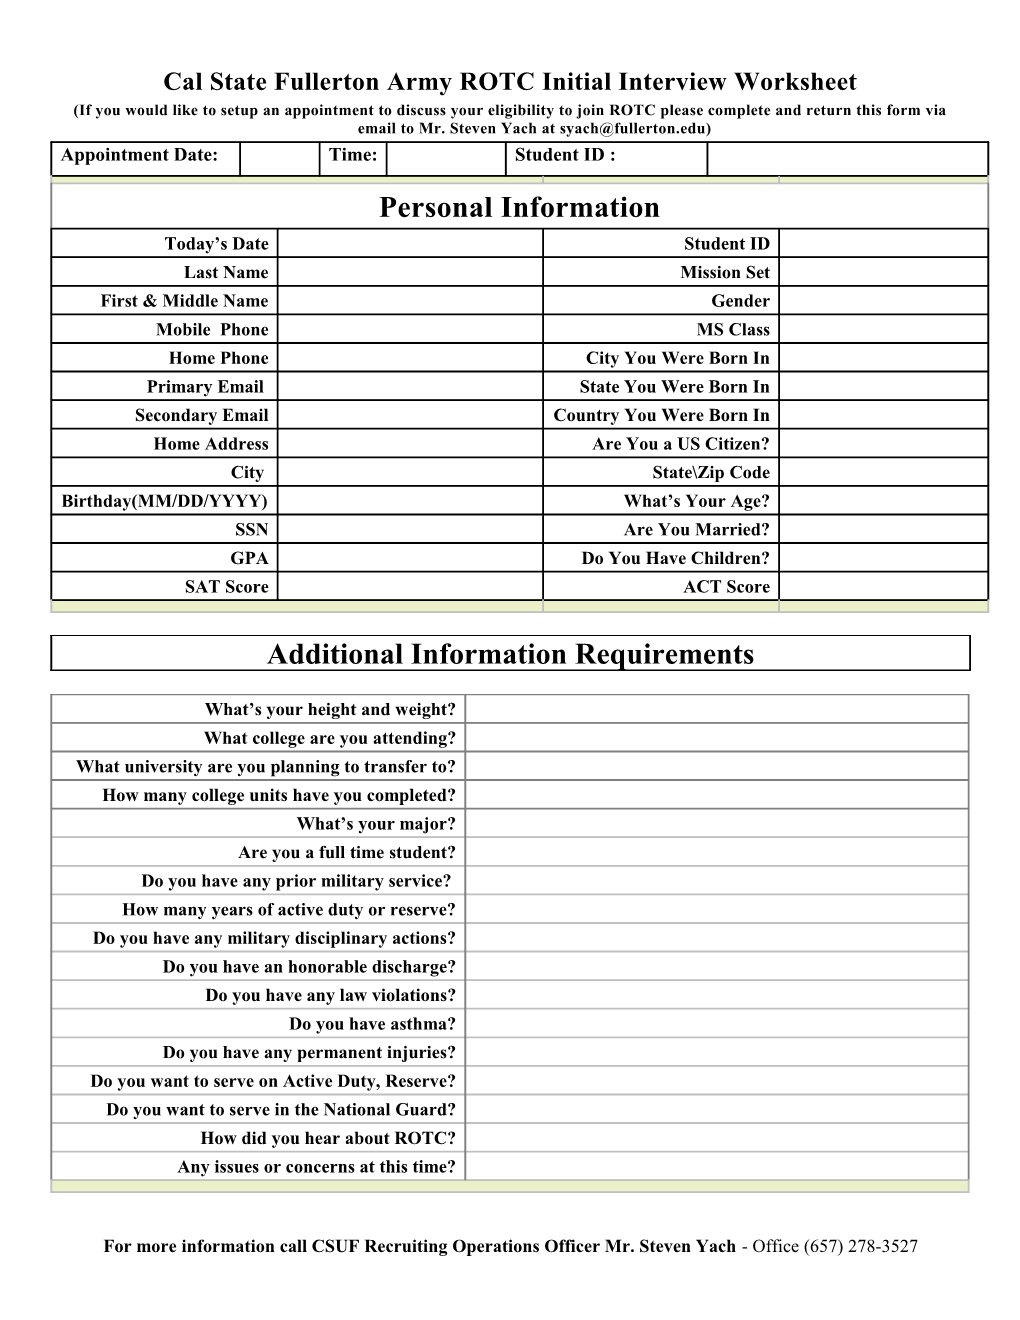 Cal State Fullerton Army ROTC Initial Interview Worksheet